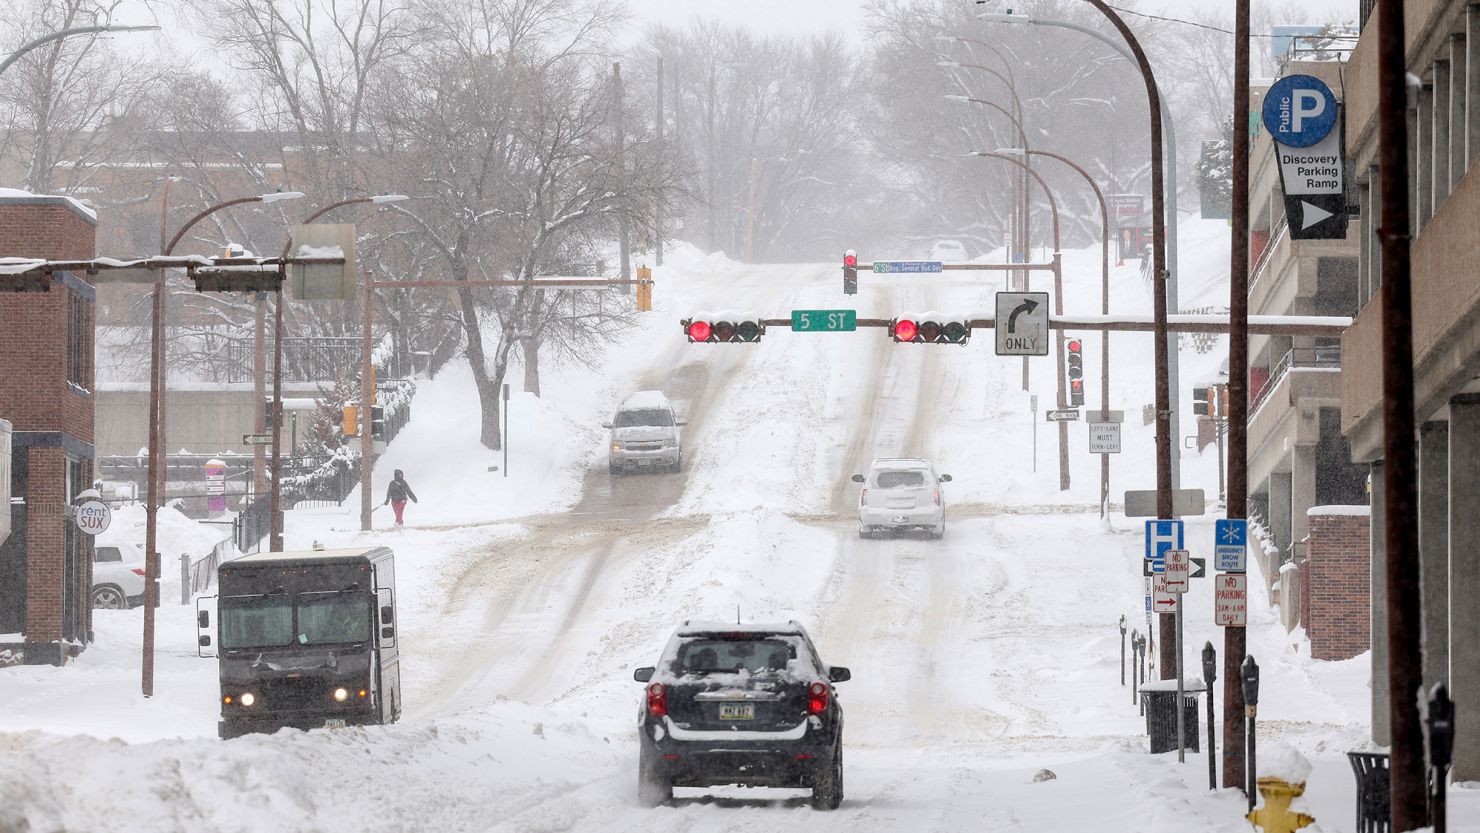 SIOUX CITY, IOWA - JANUARY 12: Heavy snow continues to fall on January 12, 2024 in Sioux City, Iowa. The second winter weather system in a week is bringing blizzard conditions across Iowa as voters prepare for the Republican Party of Iowa's presidential caucuses on January 15th. (Photo by Kevin Dietsch/Getty Images)